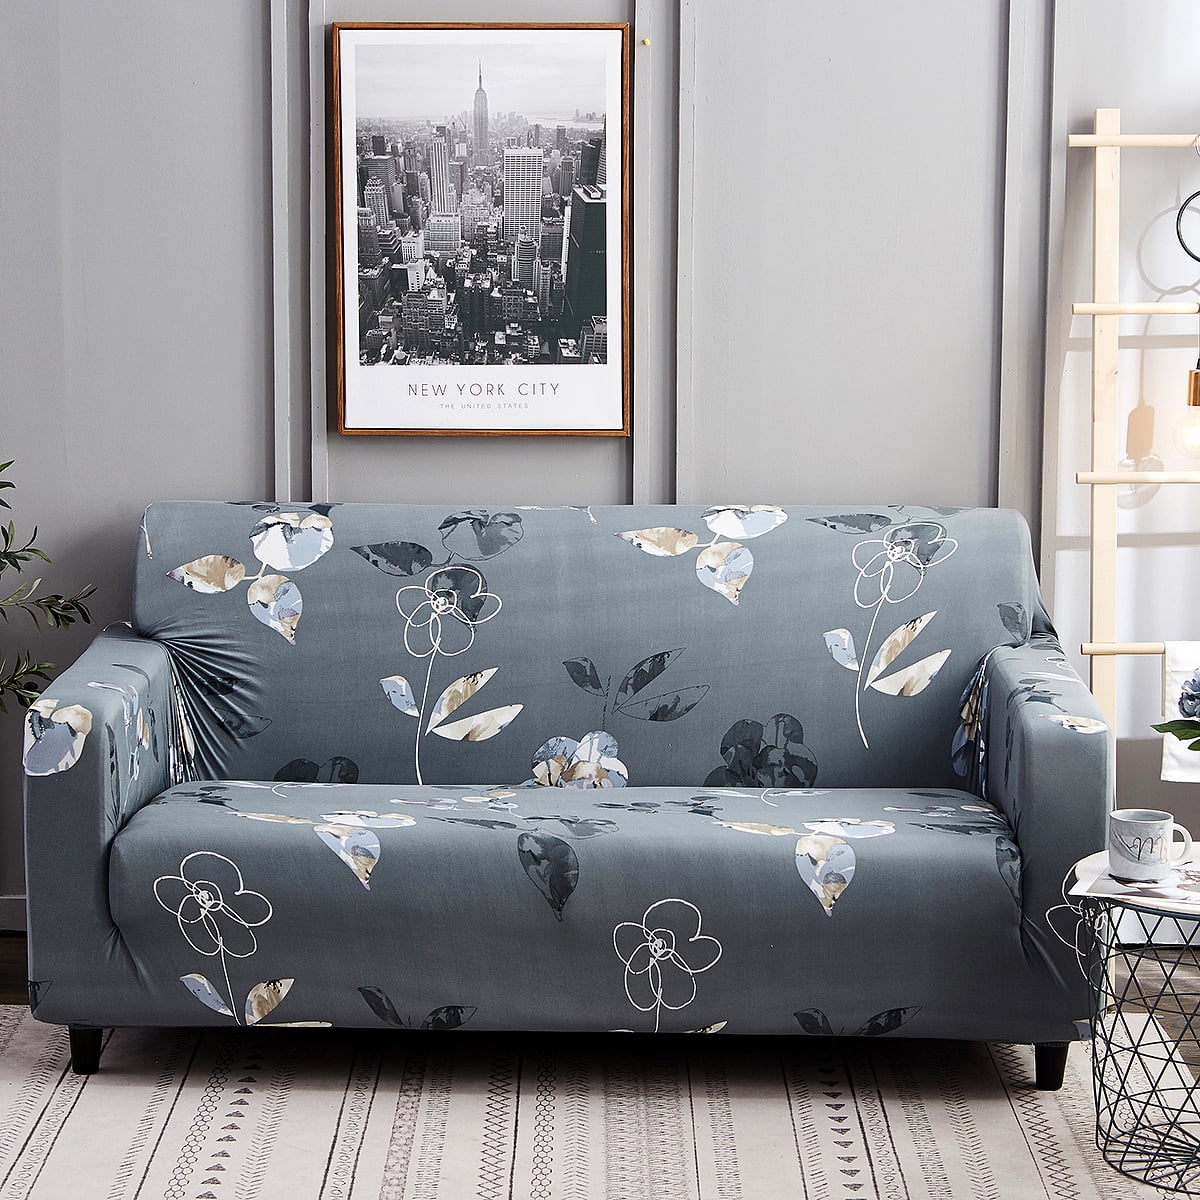 Details about   Floral Printed Non-Slip Slipcover Sofa Cover Spandex Stretch Removable Protector 